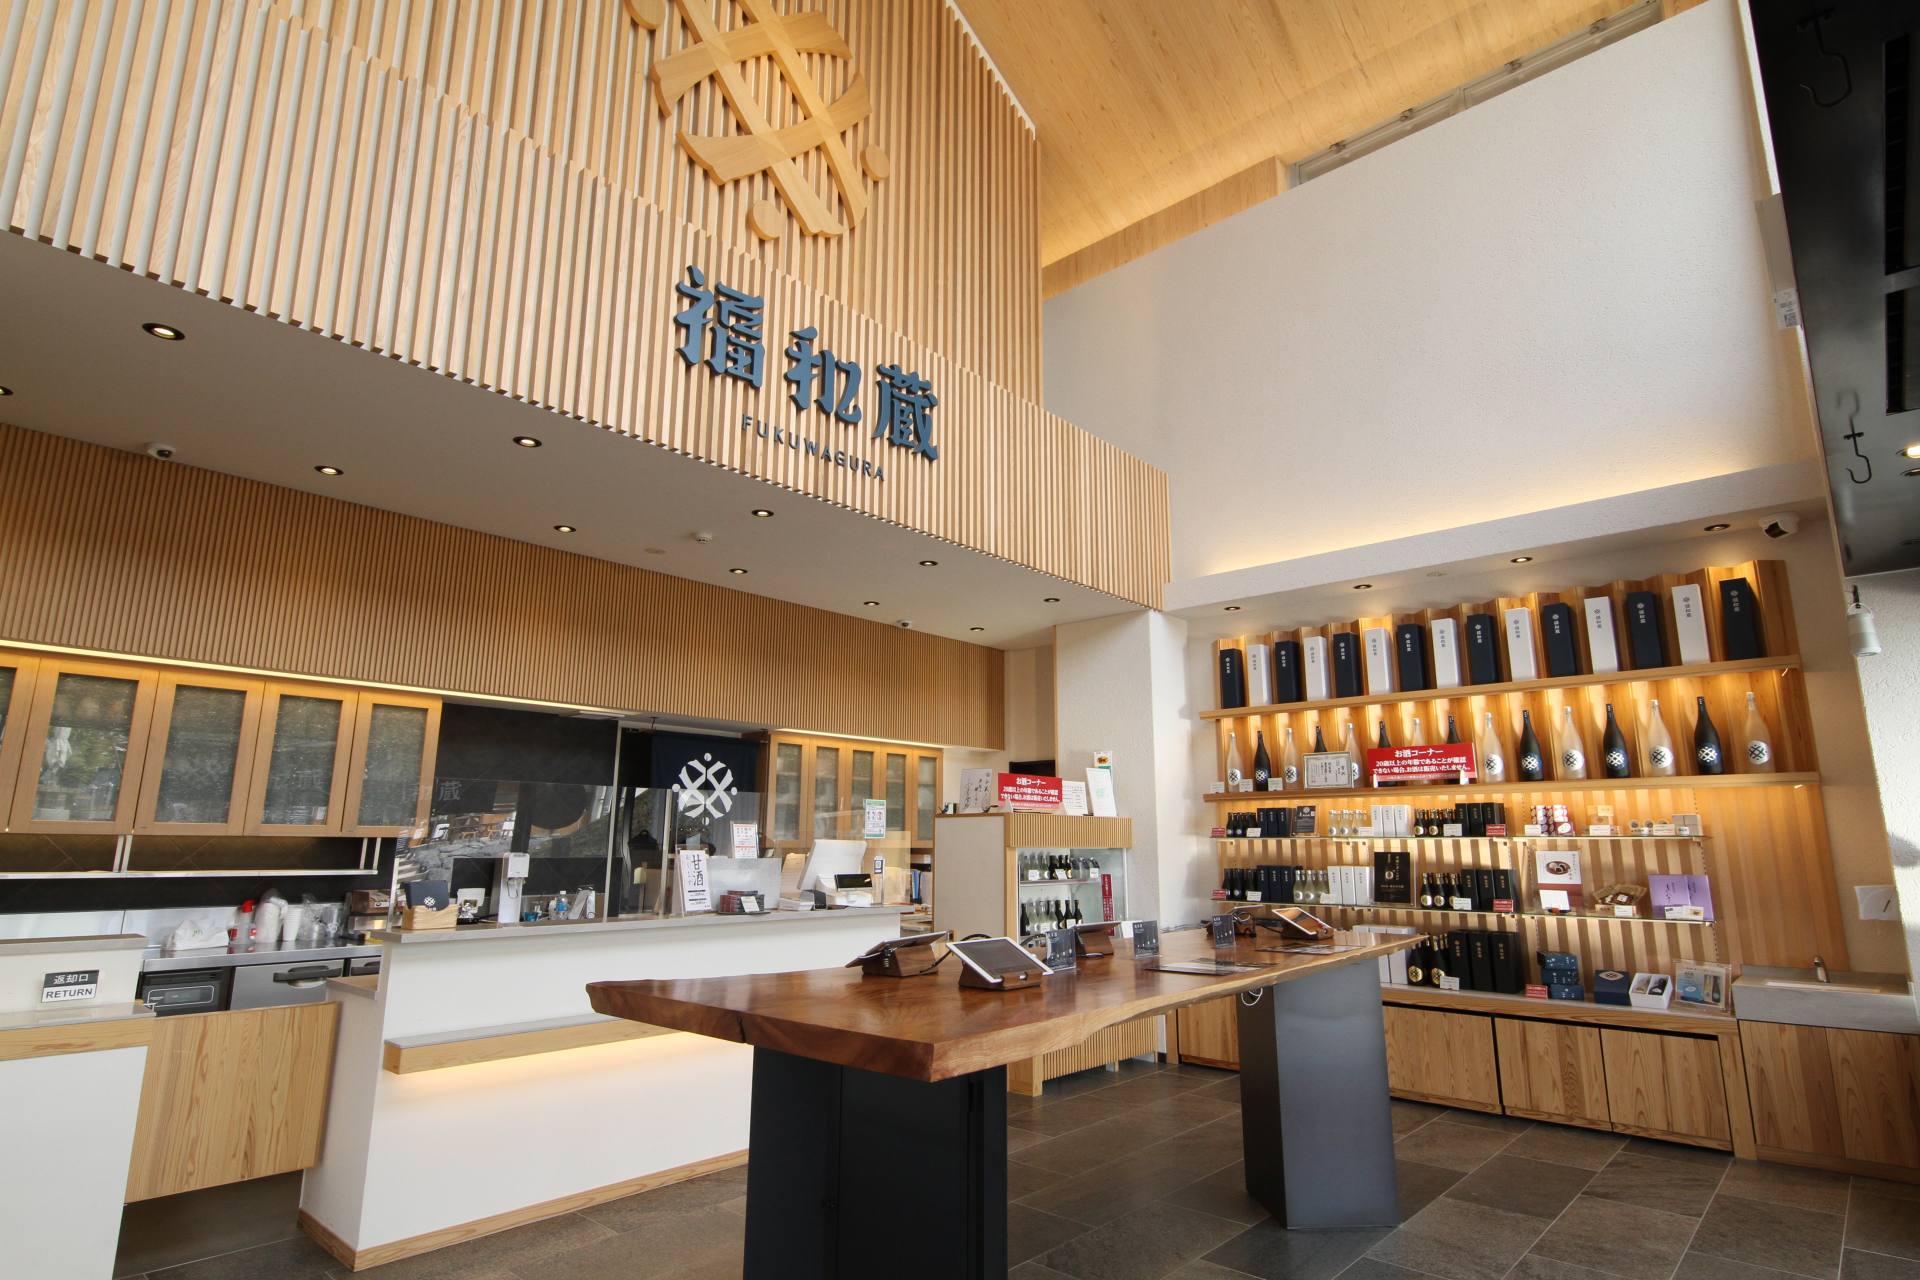 The high-ceilinged, spacious interior includes both a shop and a dining area